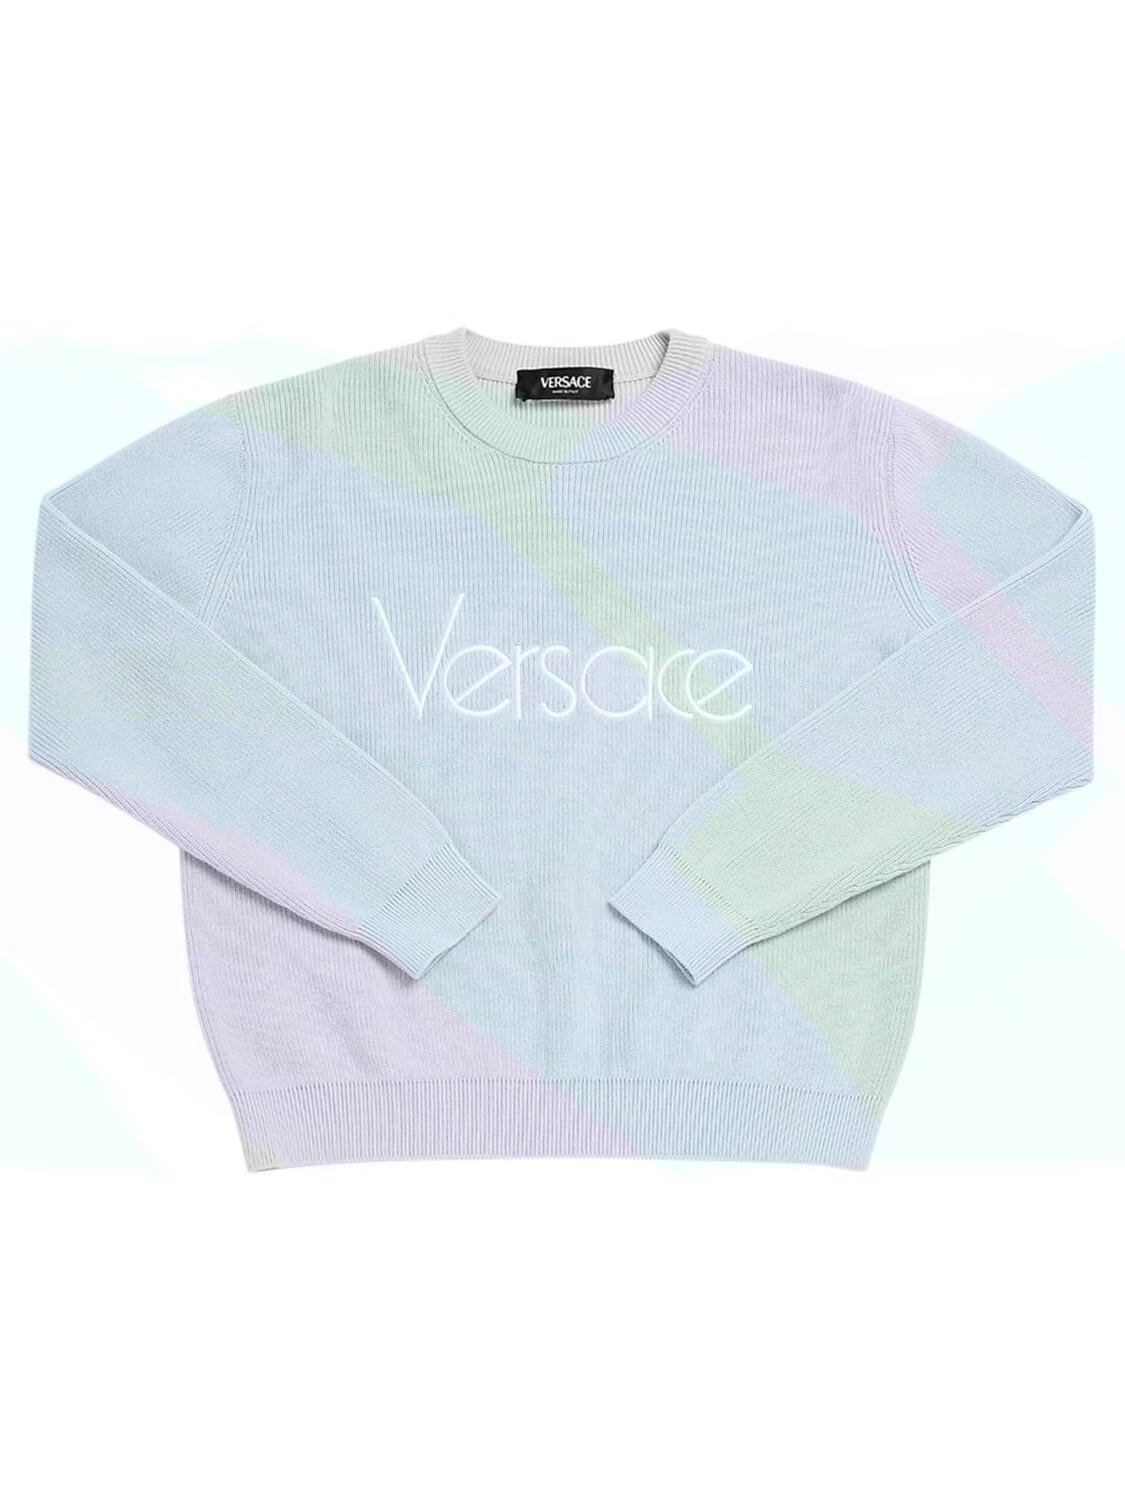 Embroidered Cotton Sweatshirt by VERSACE